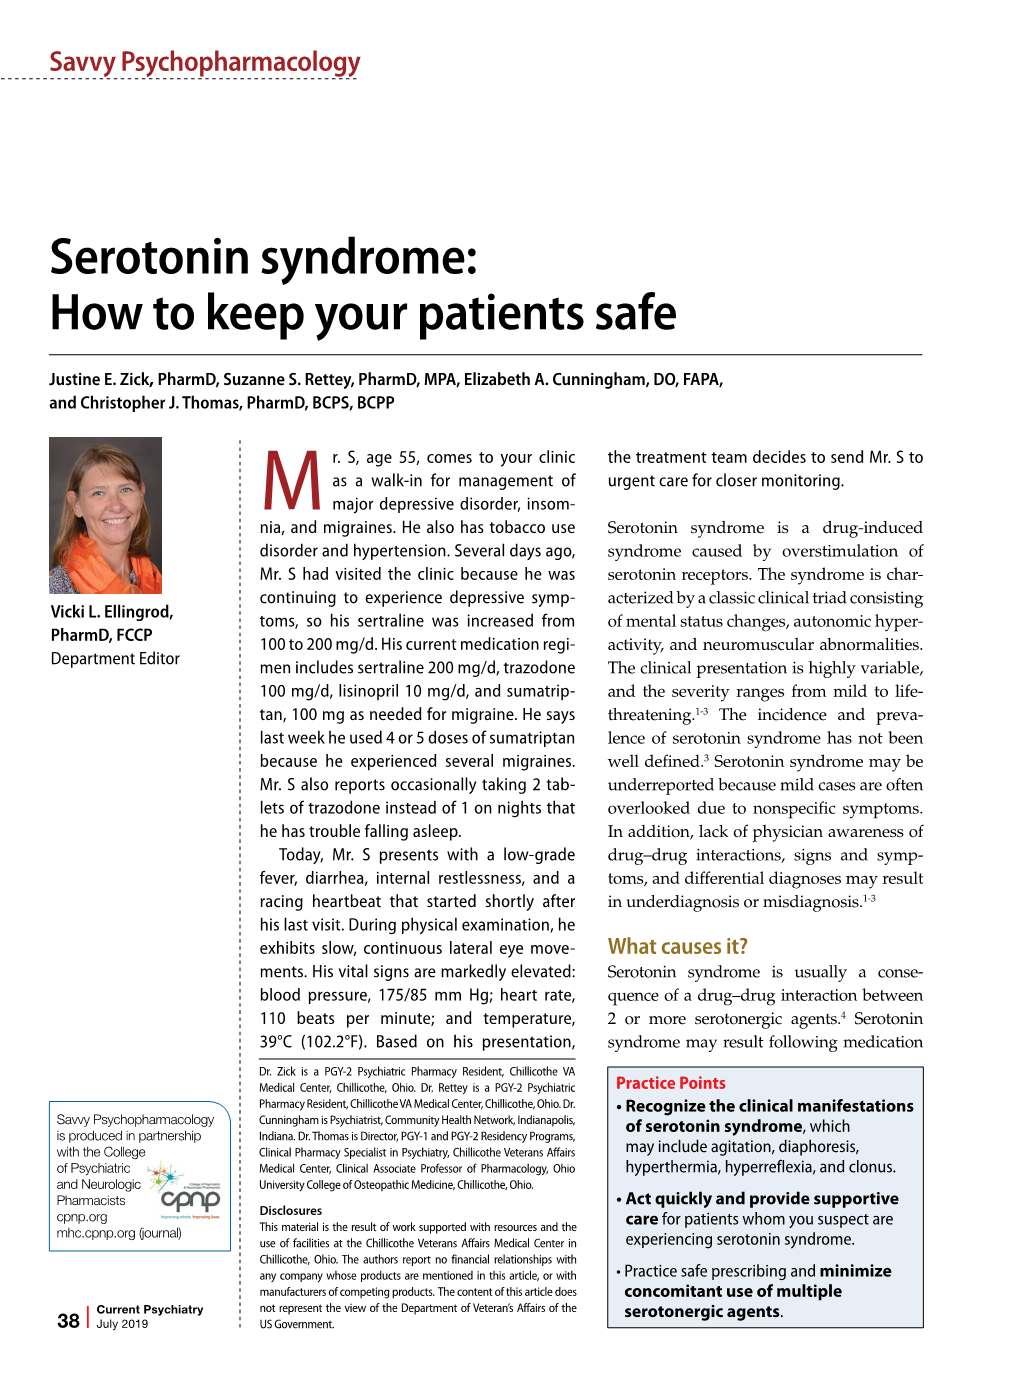 Serotonin Syndrome: How to Keep Your Patients Safe